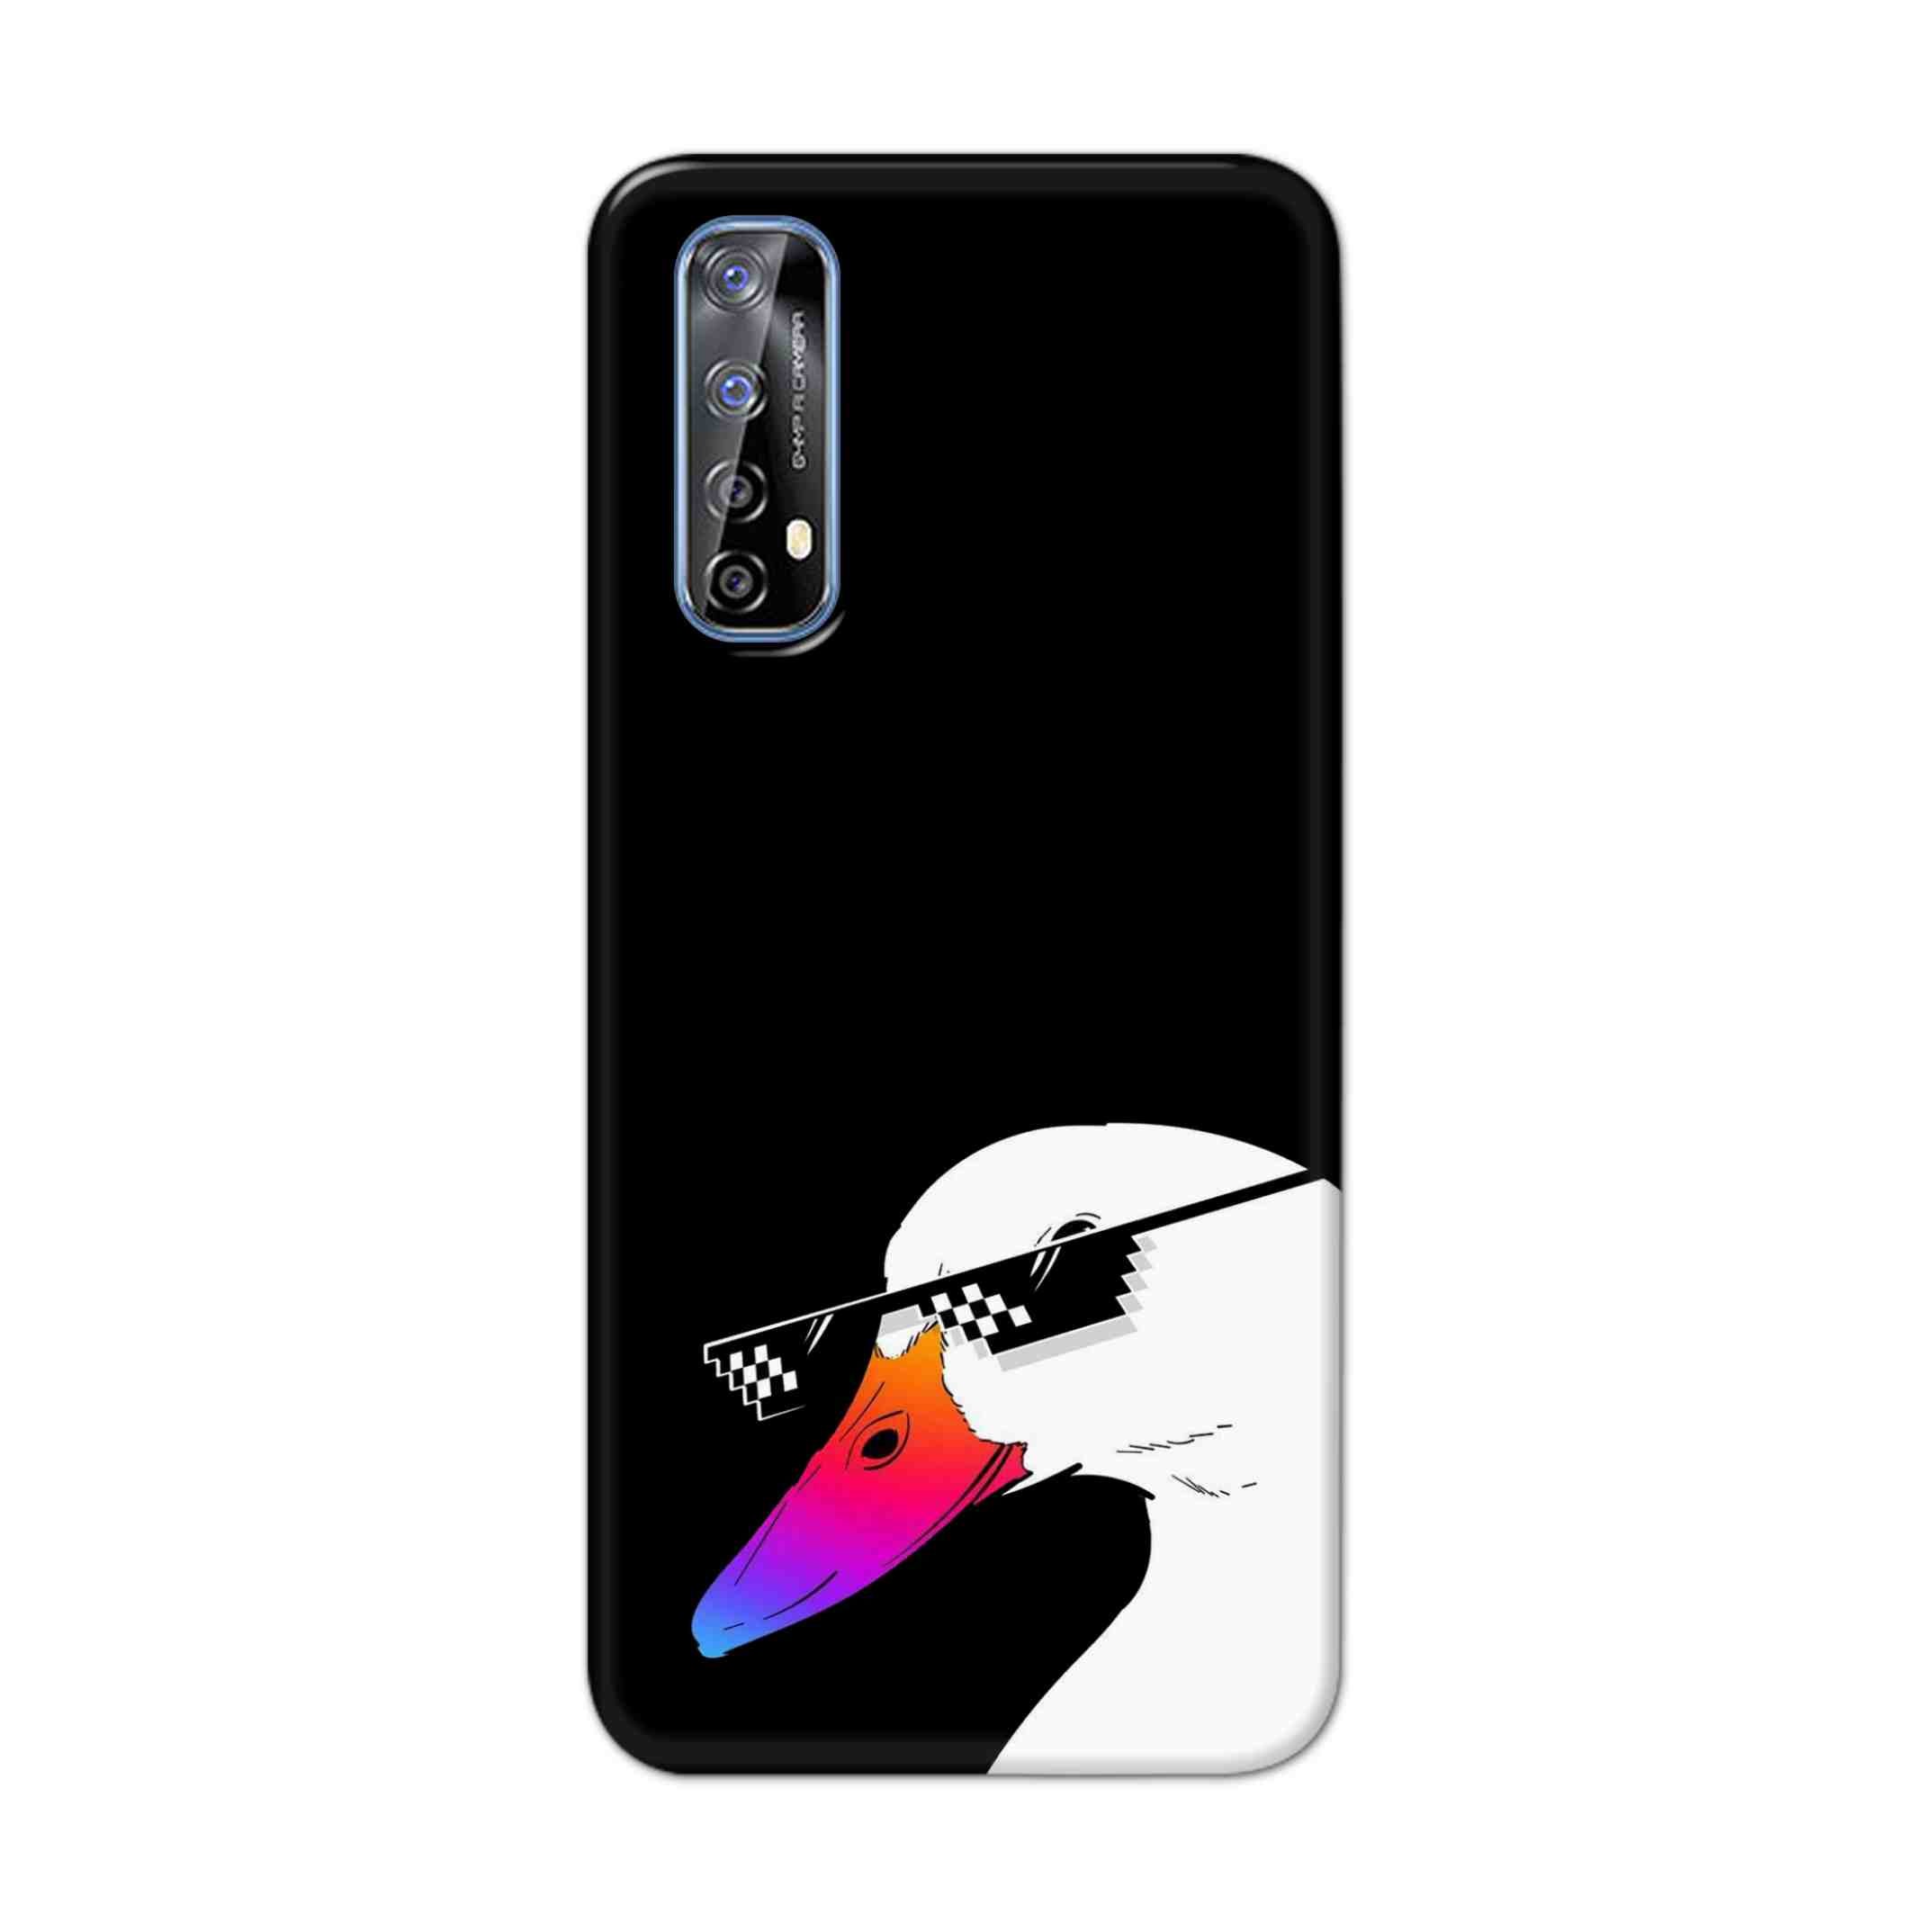 Buy Neon Duck Hard Back Mobile Phone Case Cover For Realme 7 Online